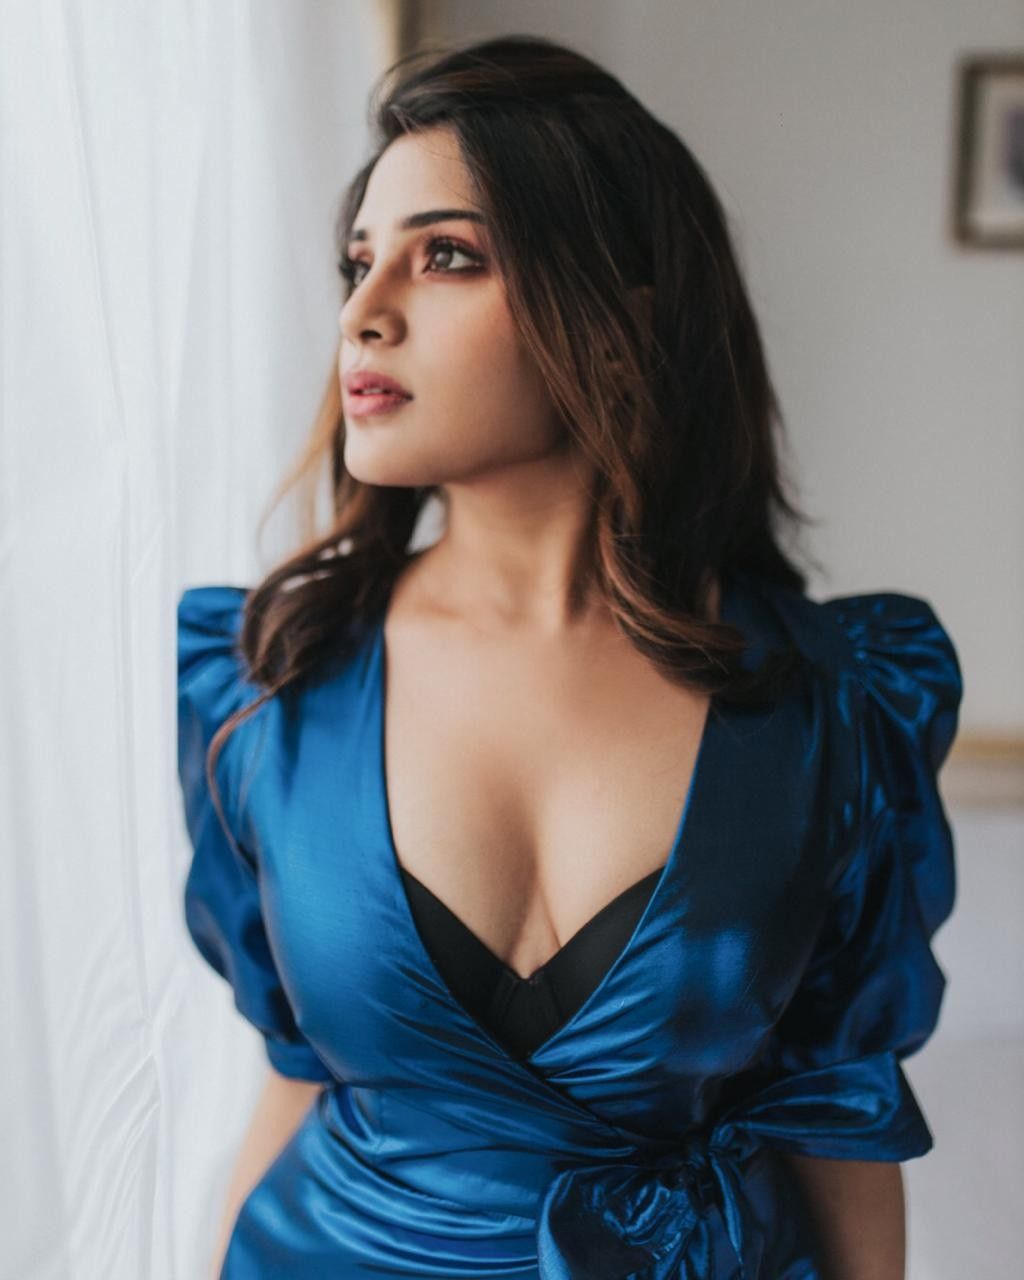 Aathmika Fuck Videos - Aathmika Height, Weight, Age, Stats, Wiki and More